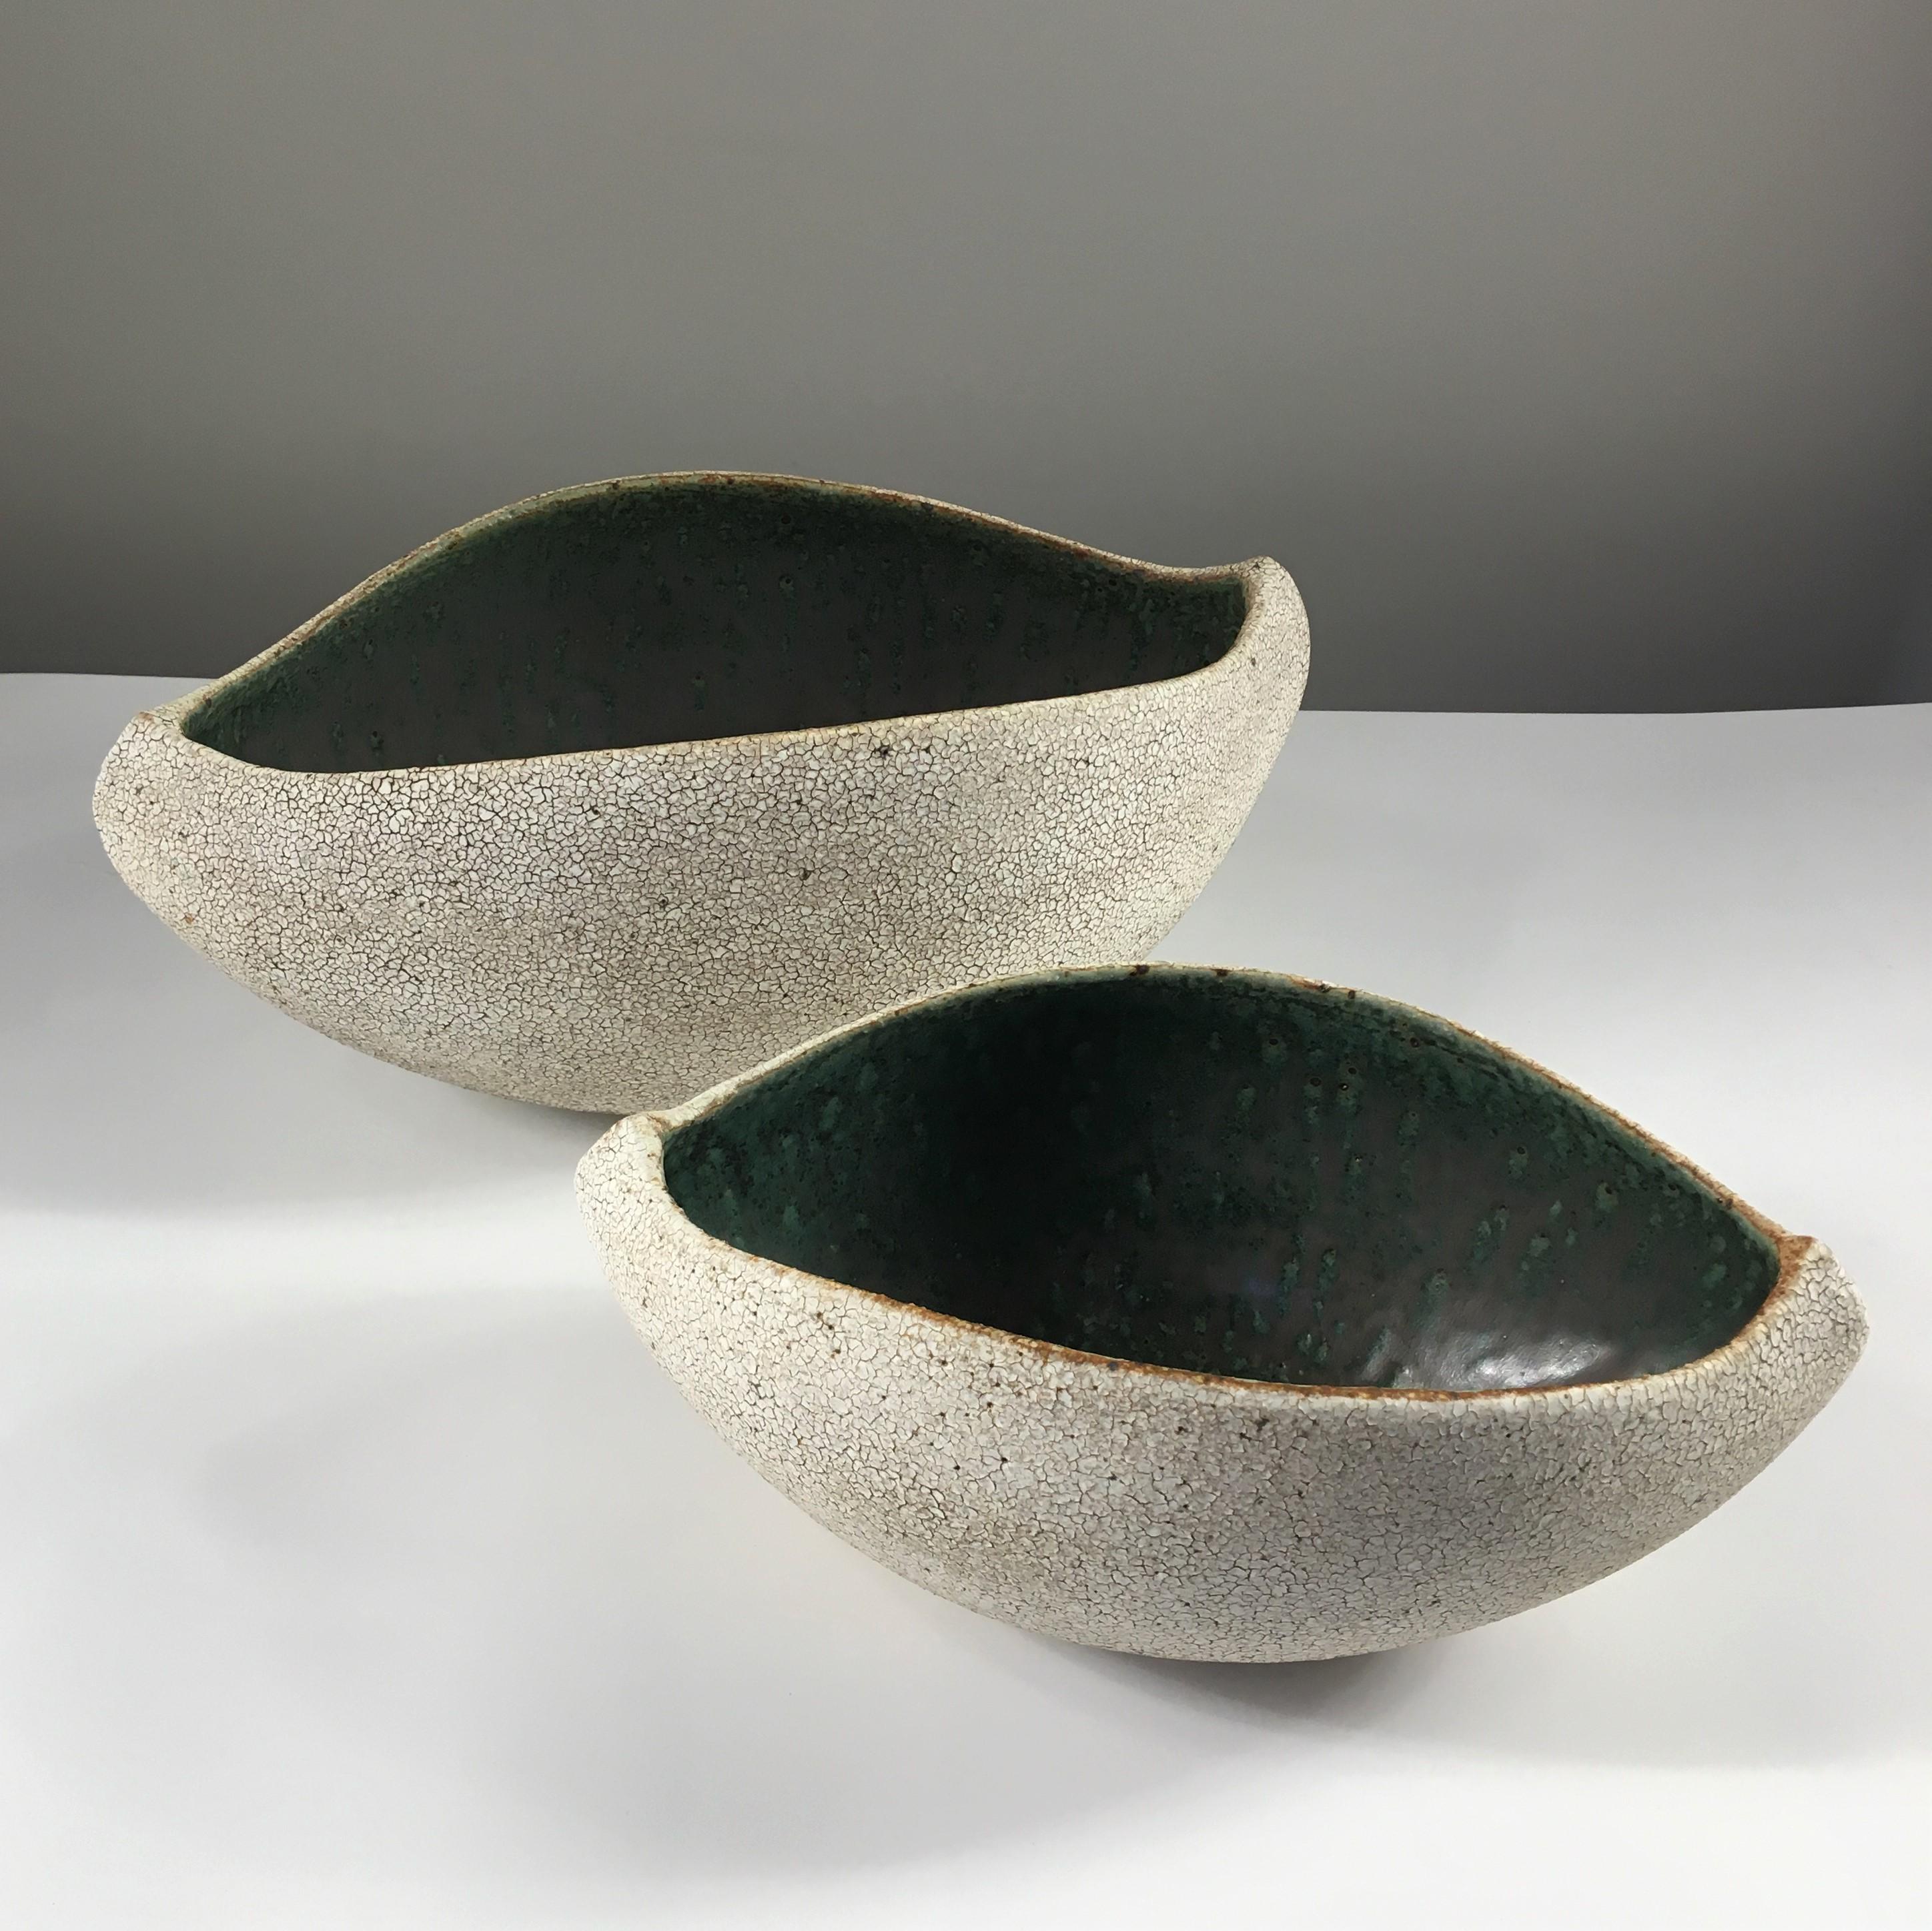 American Set of 2 Boat Shaped Pottery Bowls with Dark Inner Glaze by Yumiko Kuga For Sale